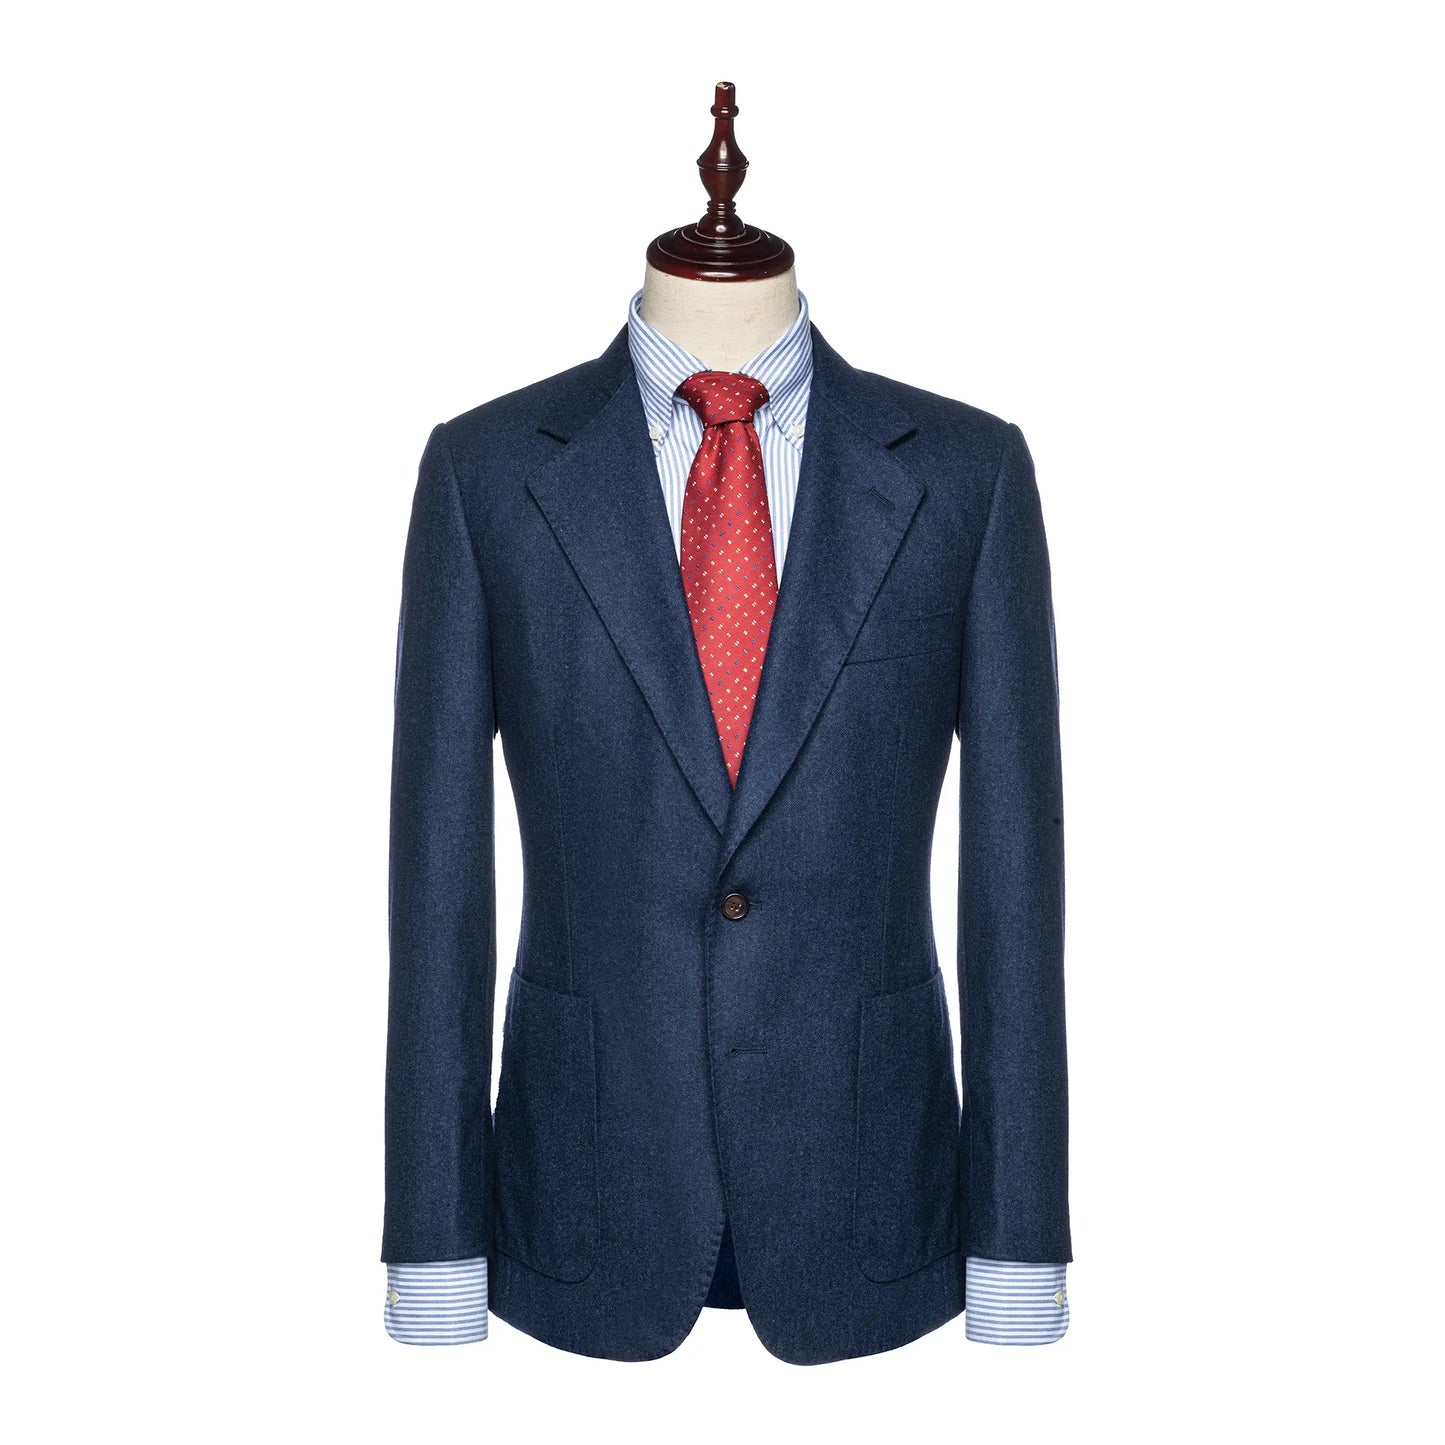 Midnight Blue Wool Jacket - Larimars Clothing Men's Formal and casual wear shirts